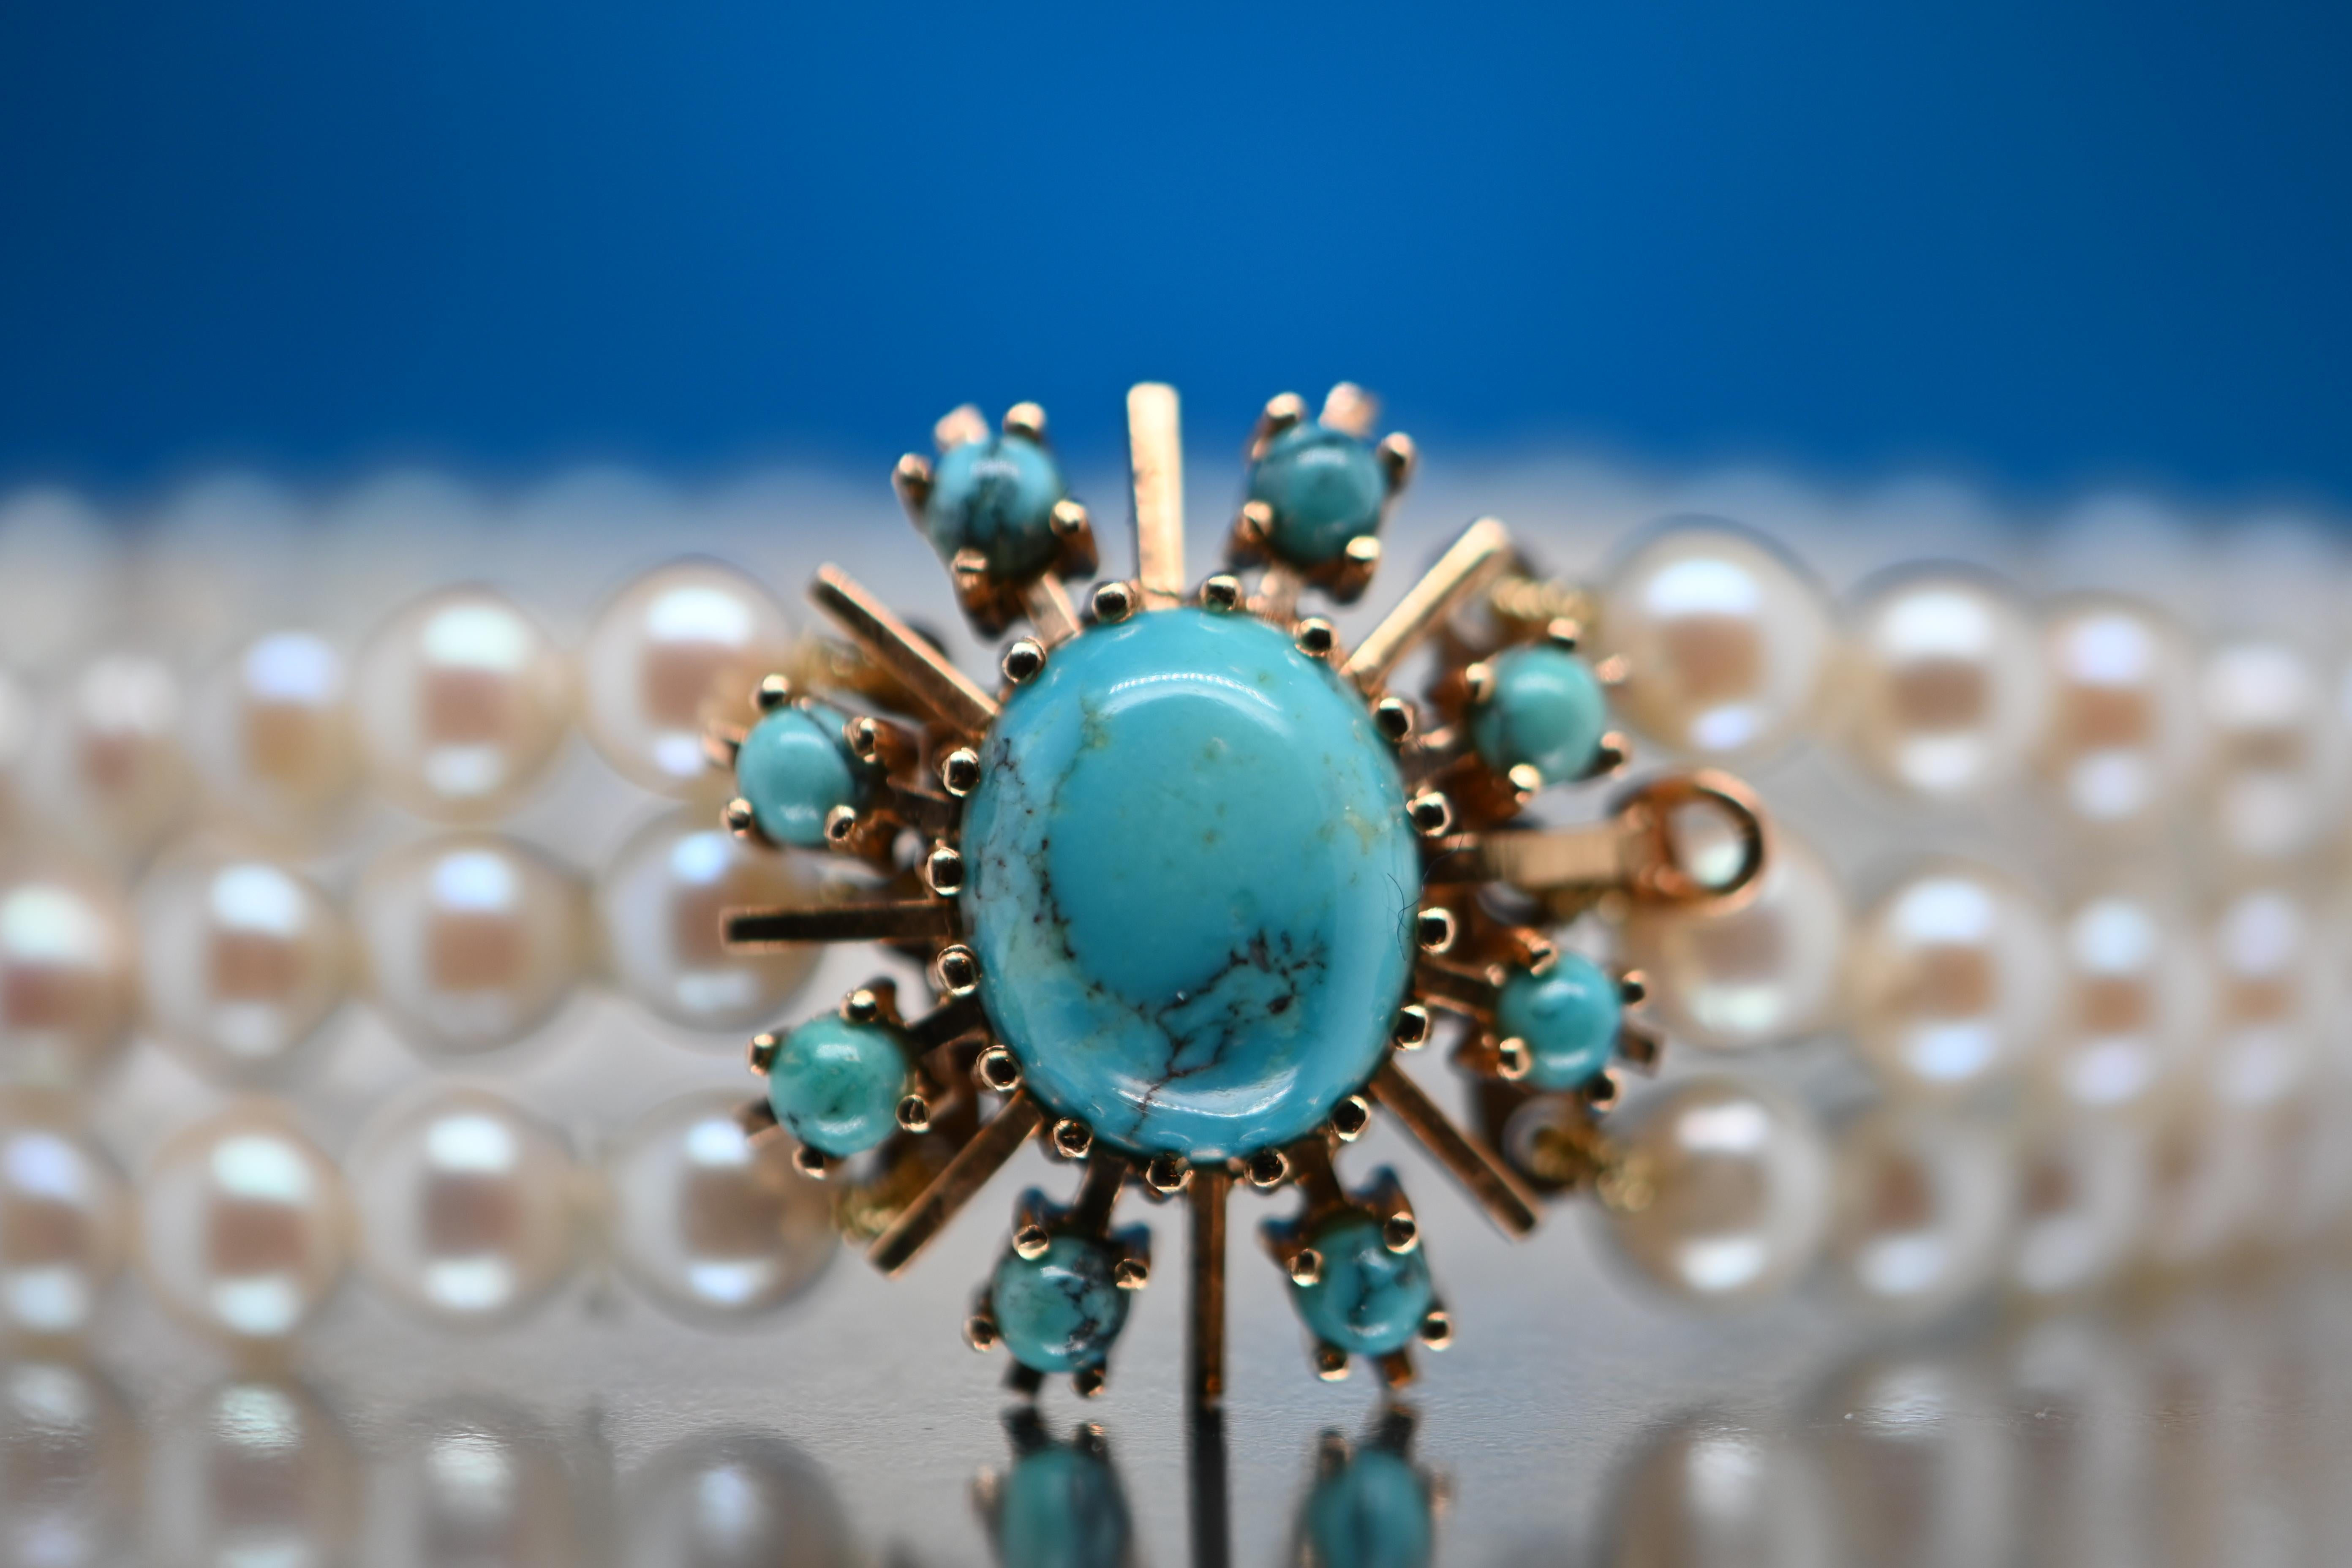 Composed of 9 exquisite turquoise pearls and 90 Akoya pearls of exceptional quality, this bracelet is a unique masterpiece that is sure to captivate all eyes. Each Akoya pearl has been carefully selected for its size, perfect roundness and brilliant